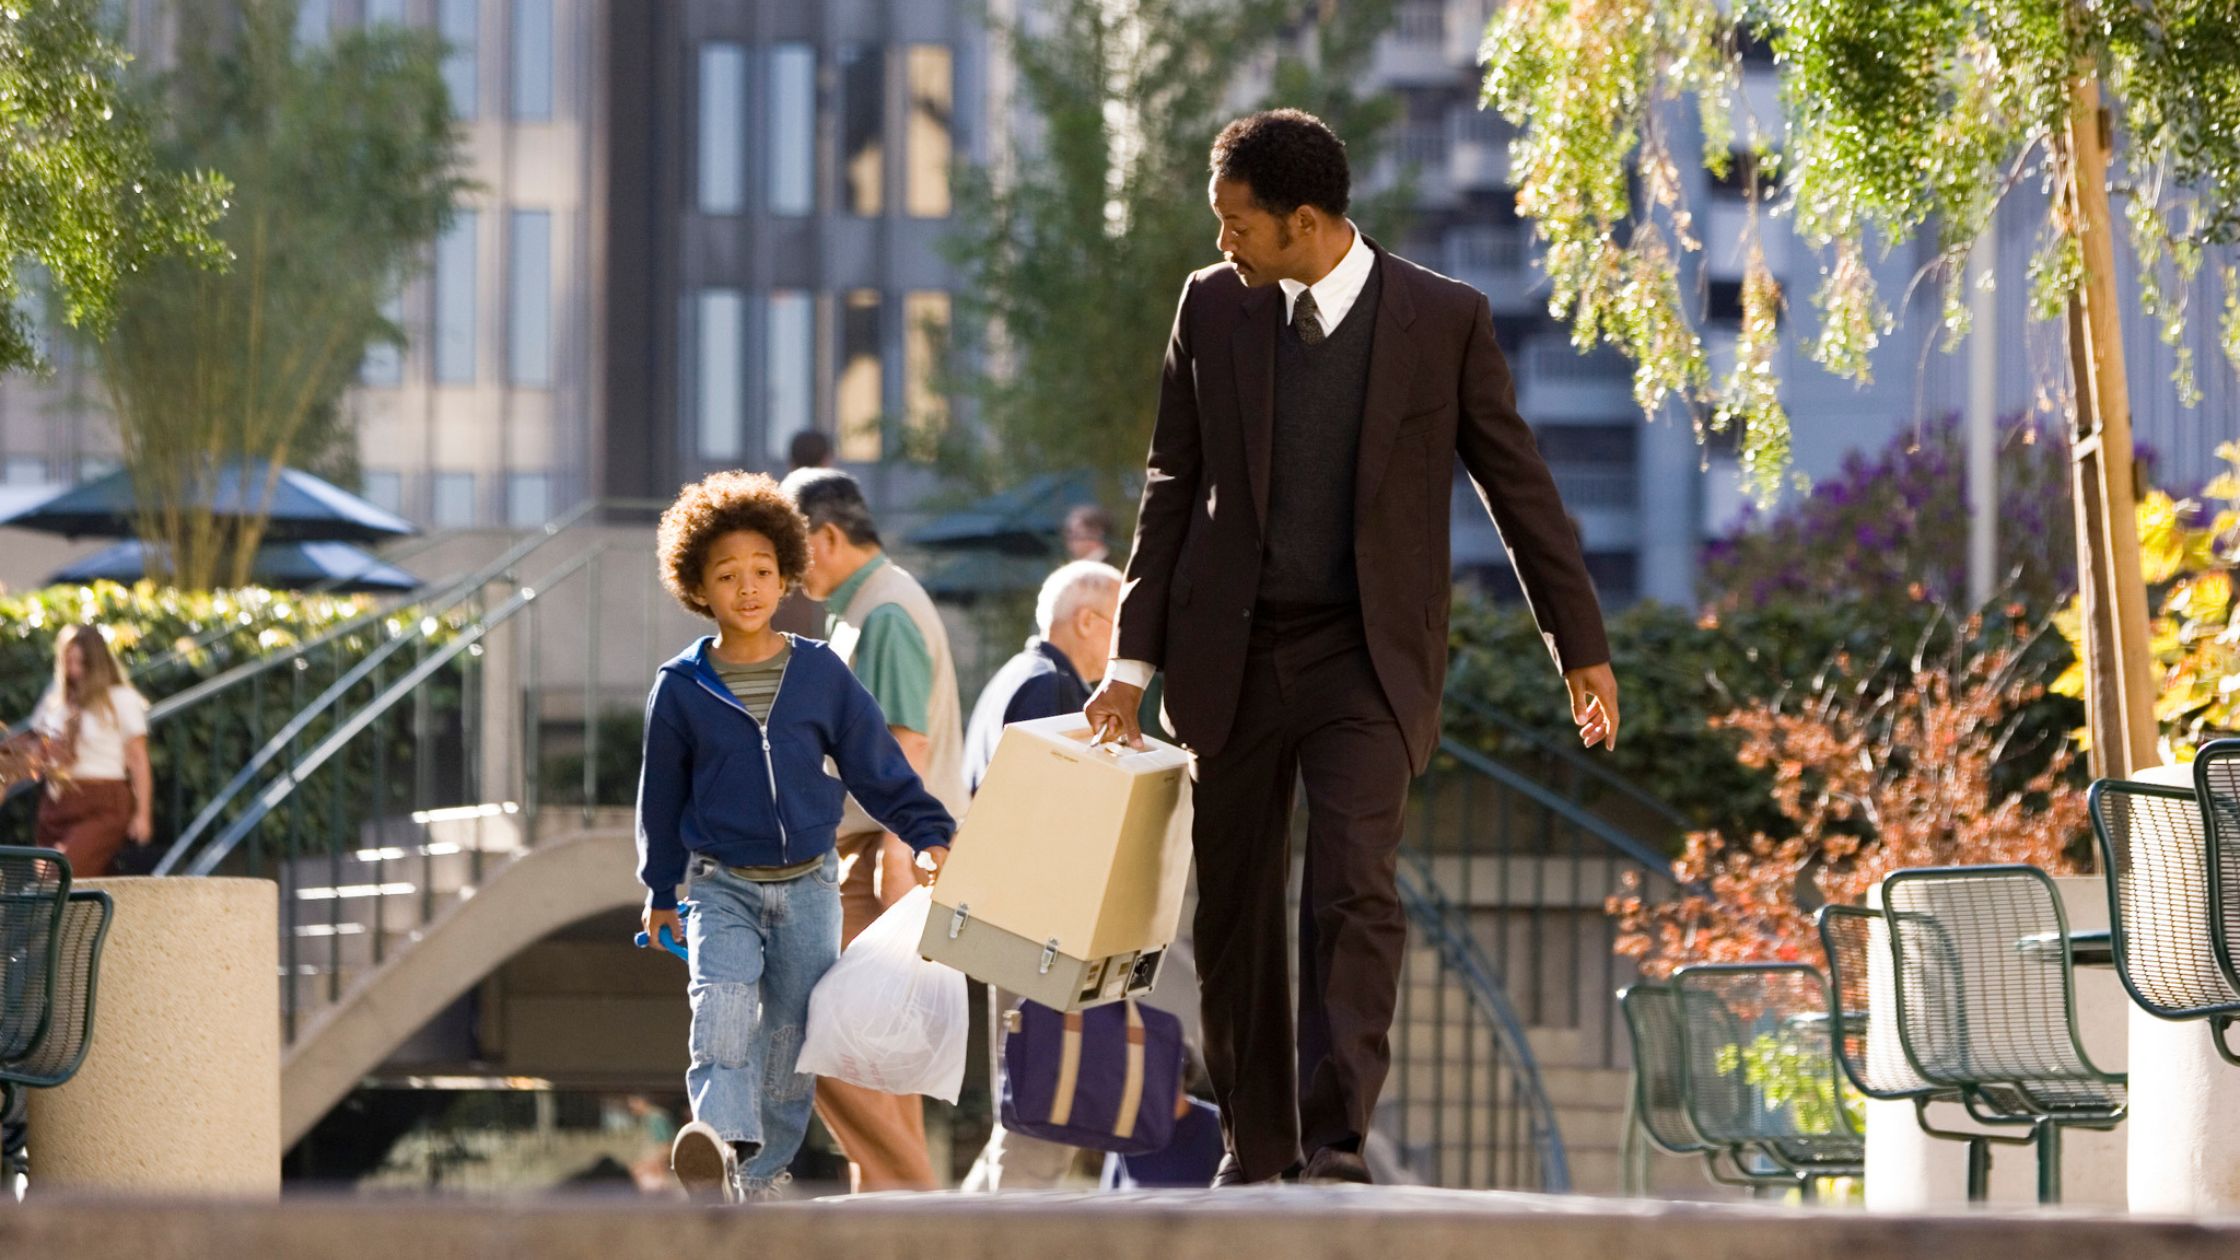 Will smith and his son in the film The Pursuit of Happyness. 